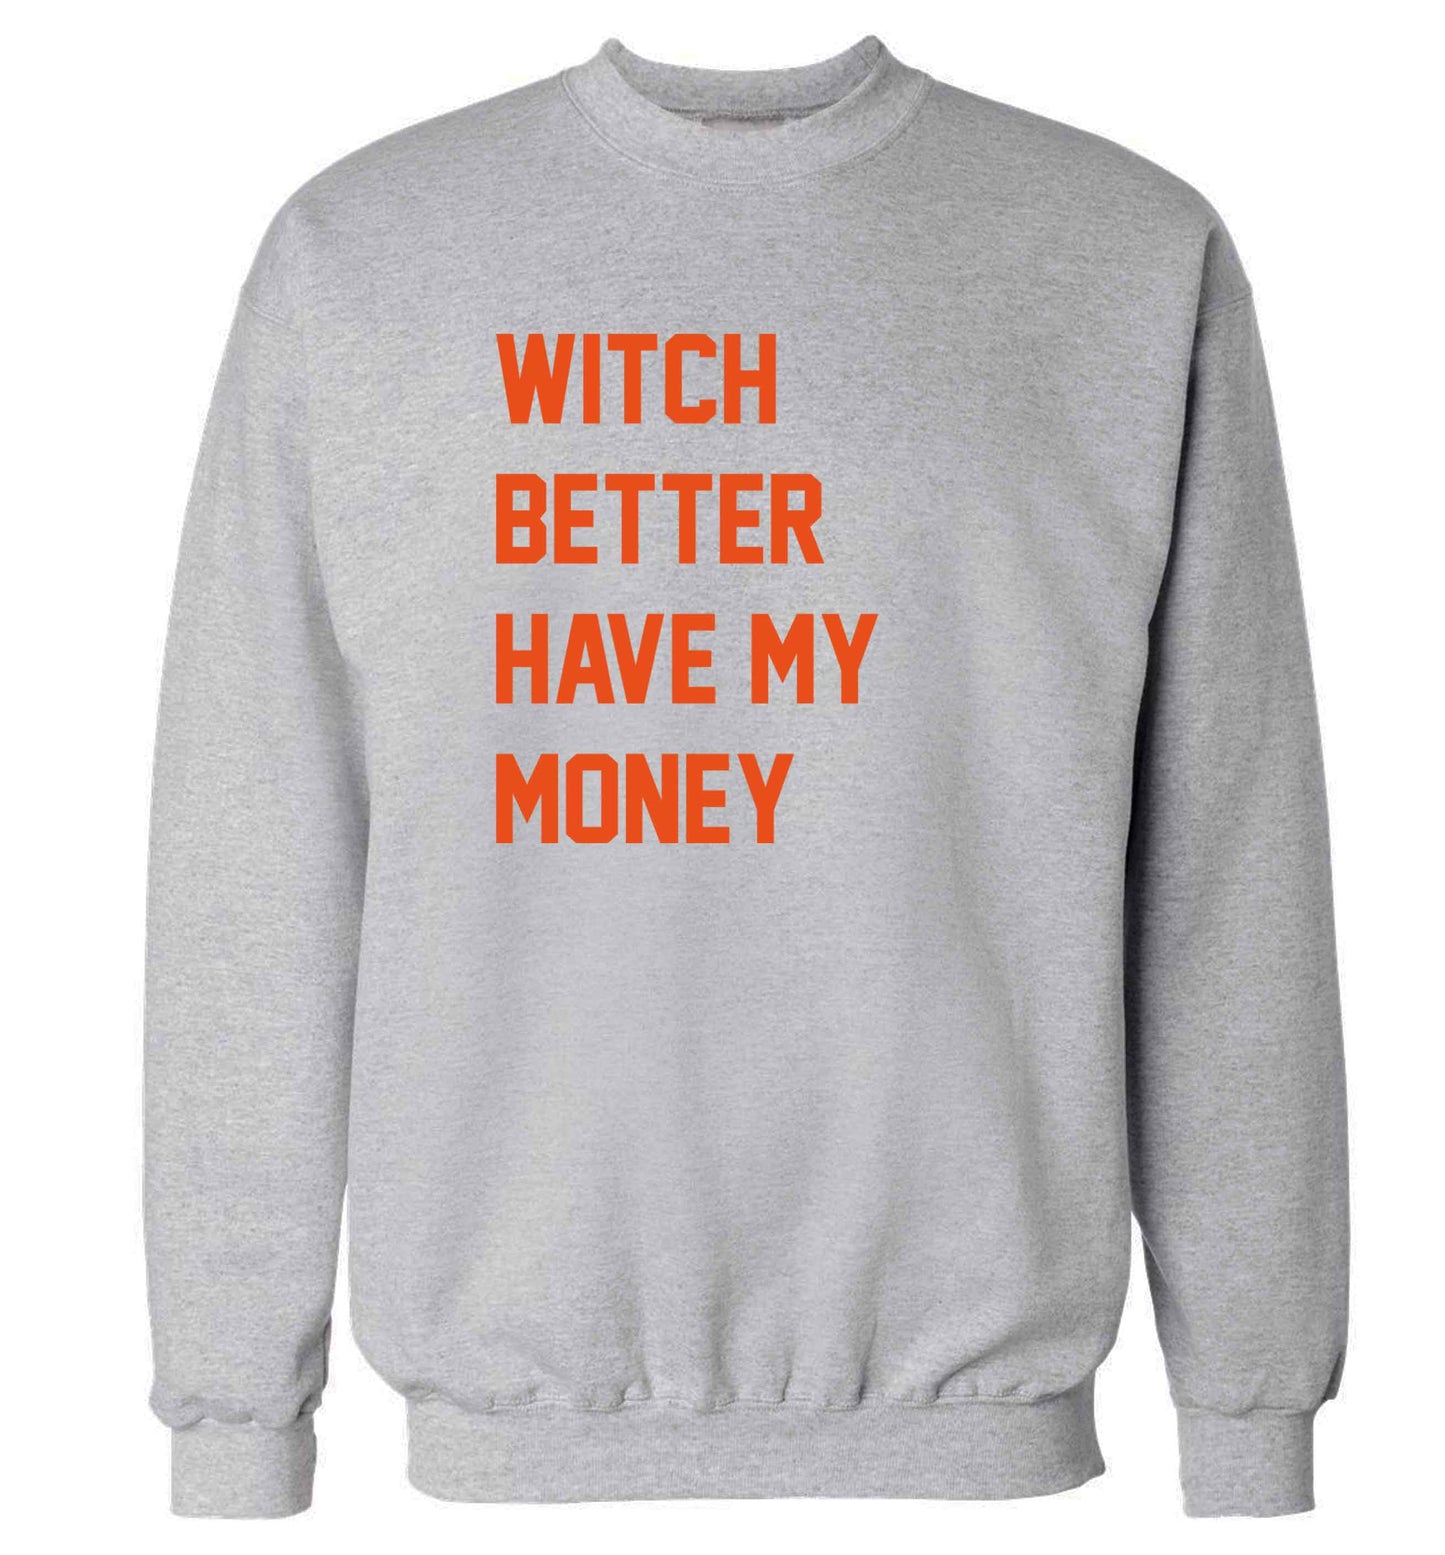 Witch better have my money adult's unisex grey sweater 2XL